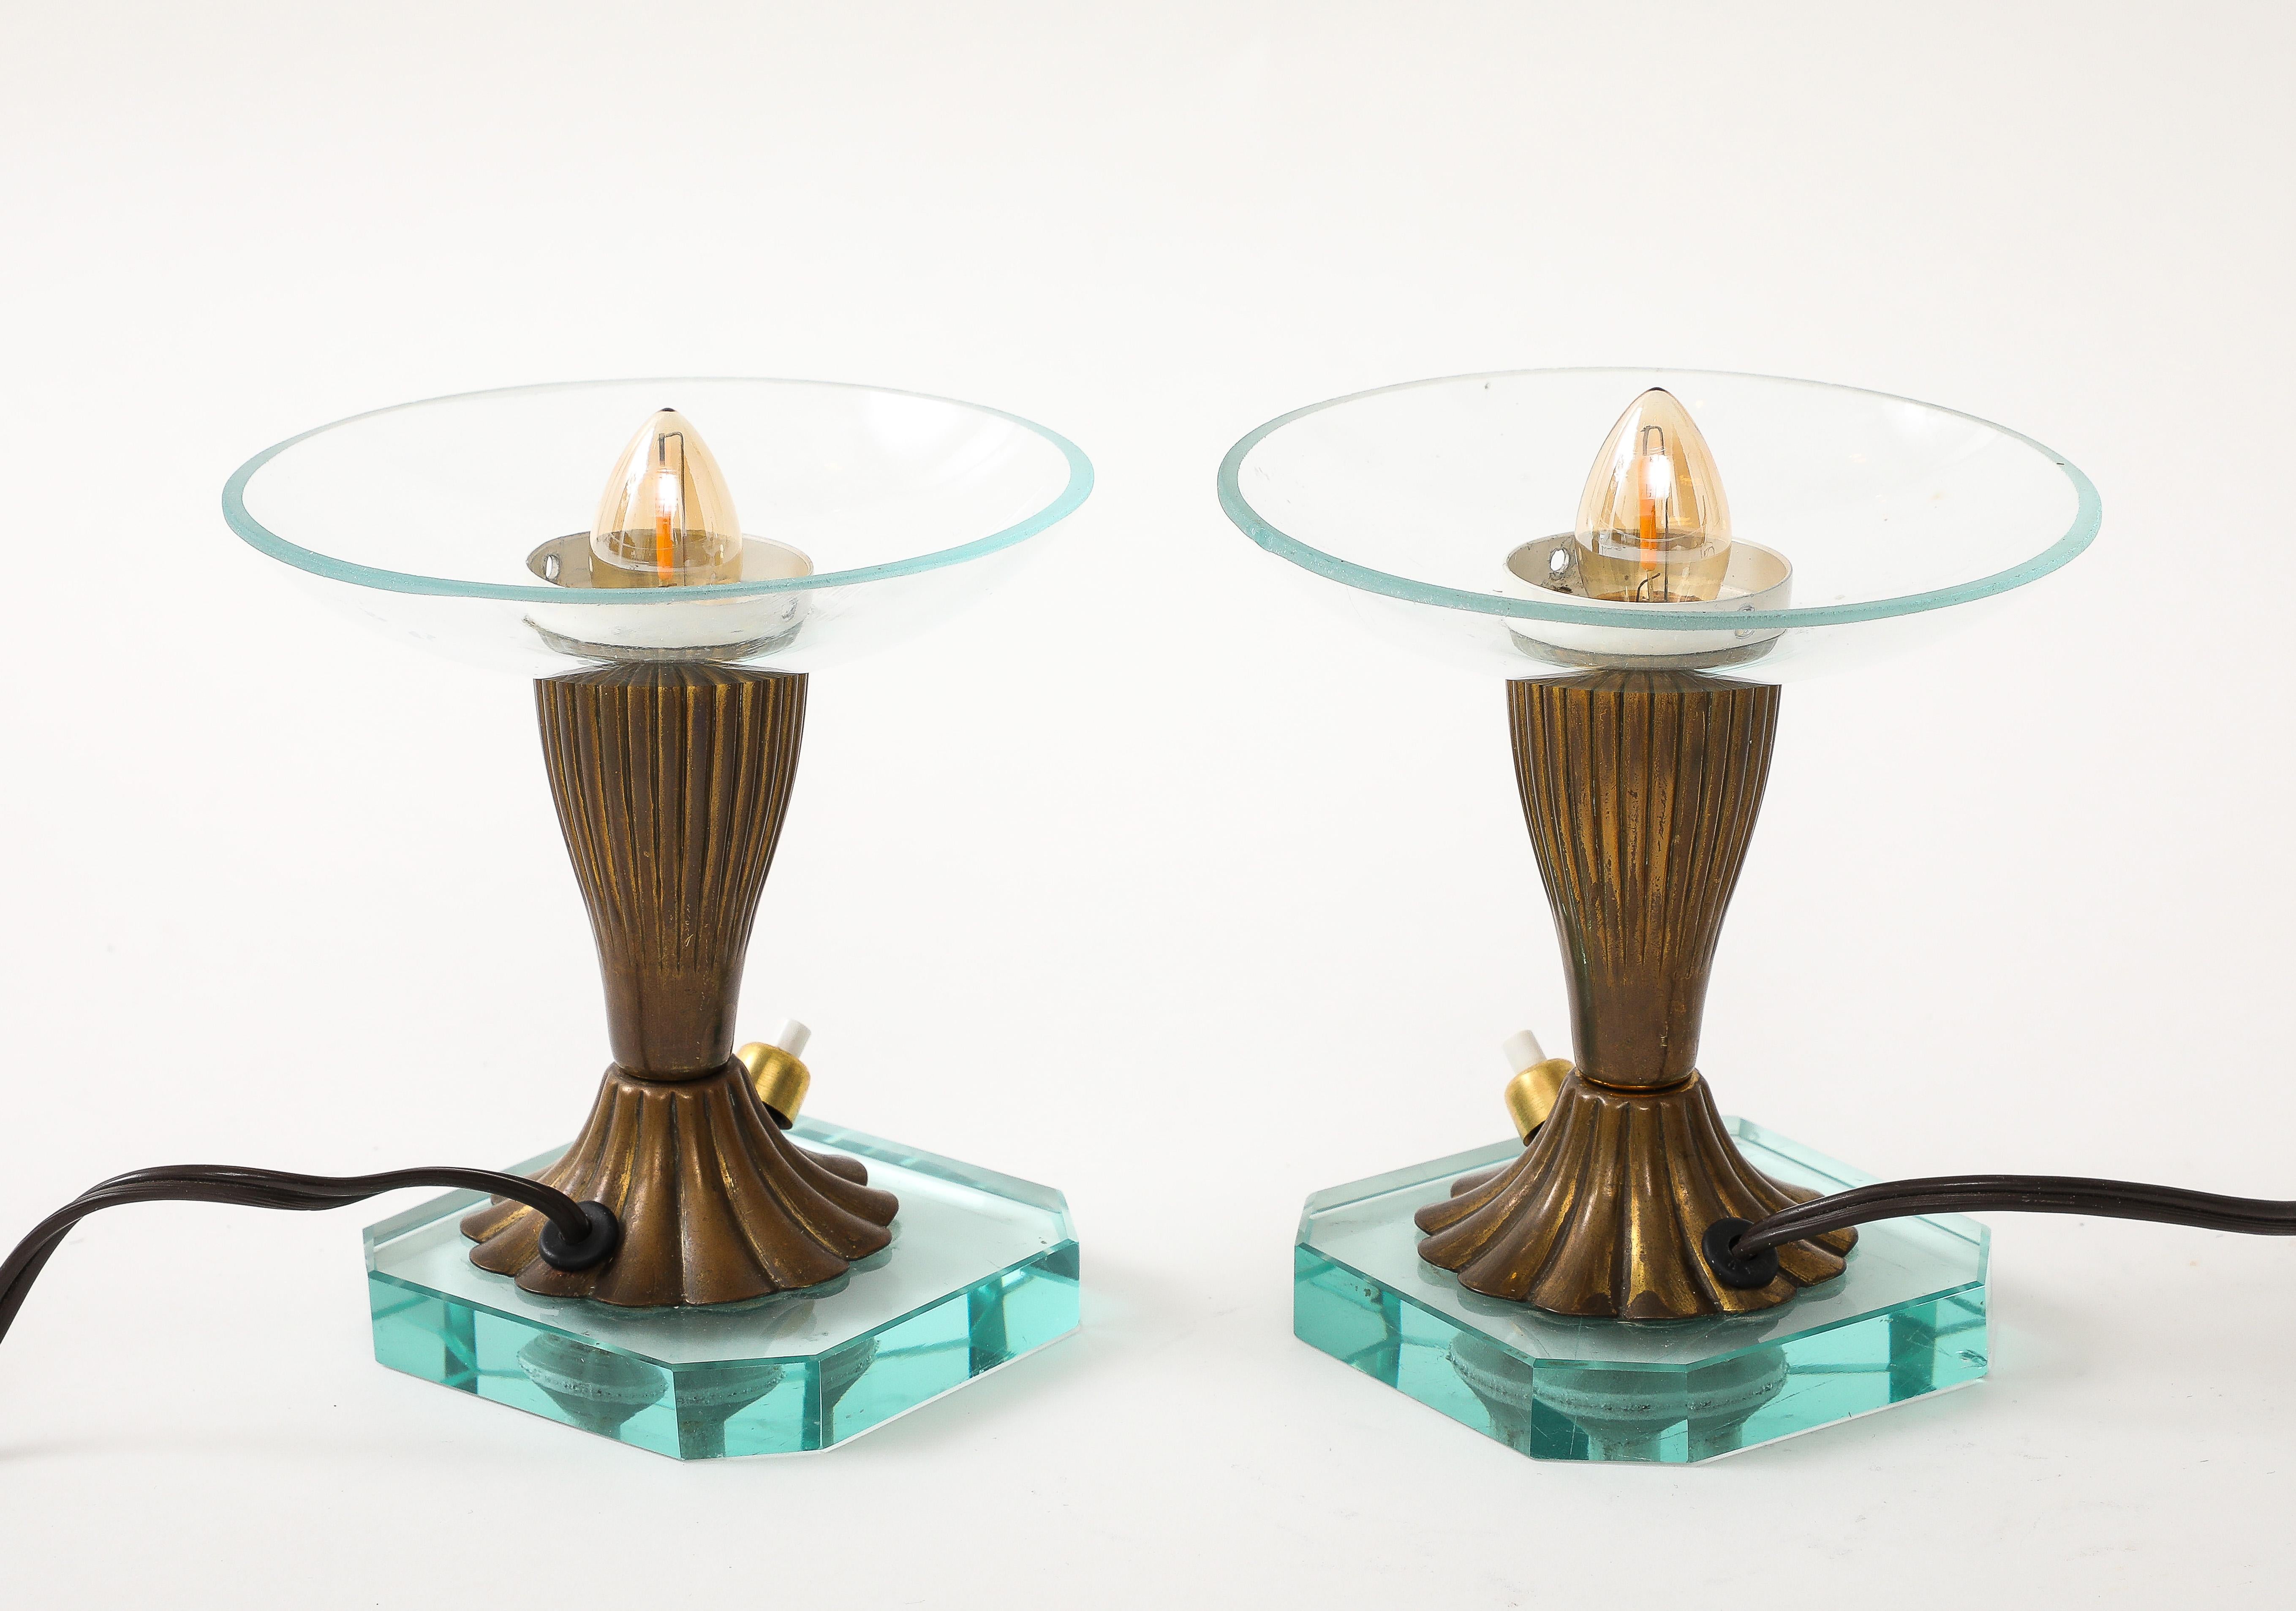 Pair of Glass & Brass Petite Table Lamps att. Pietro Chiesa - Italy 1940's For Sale 3